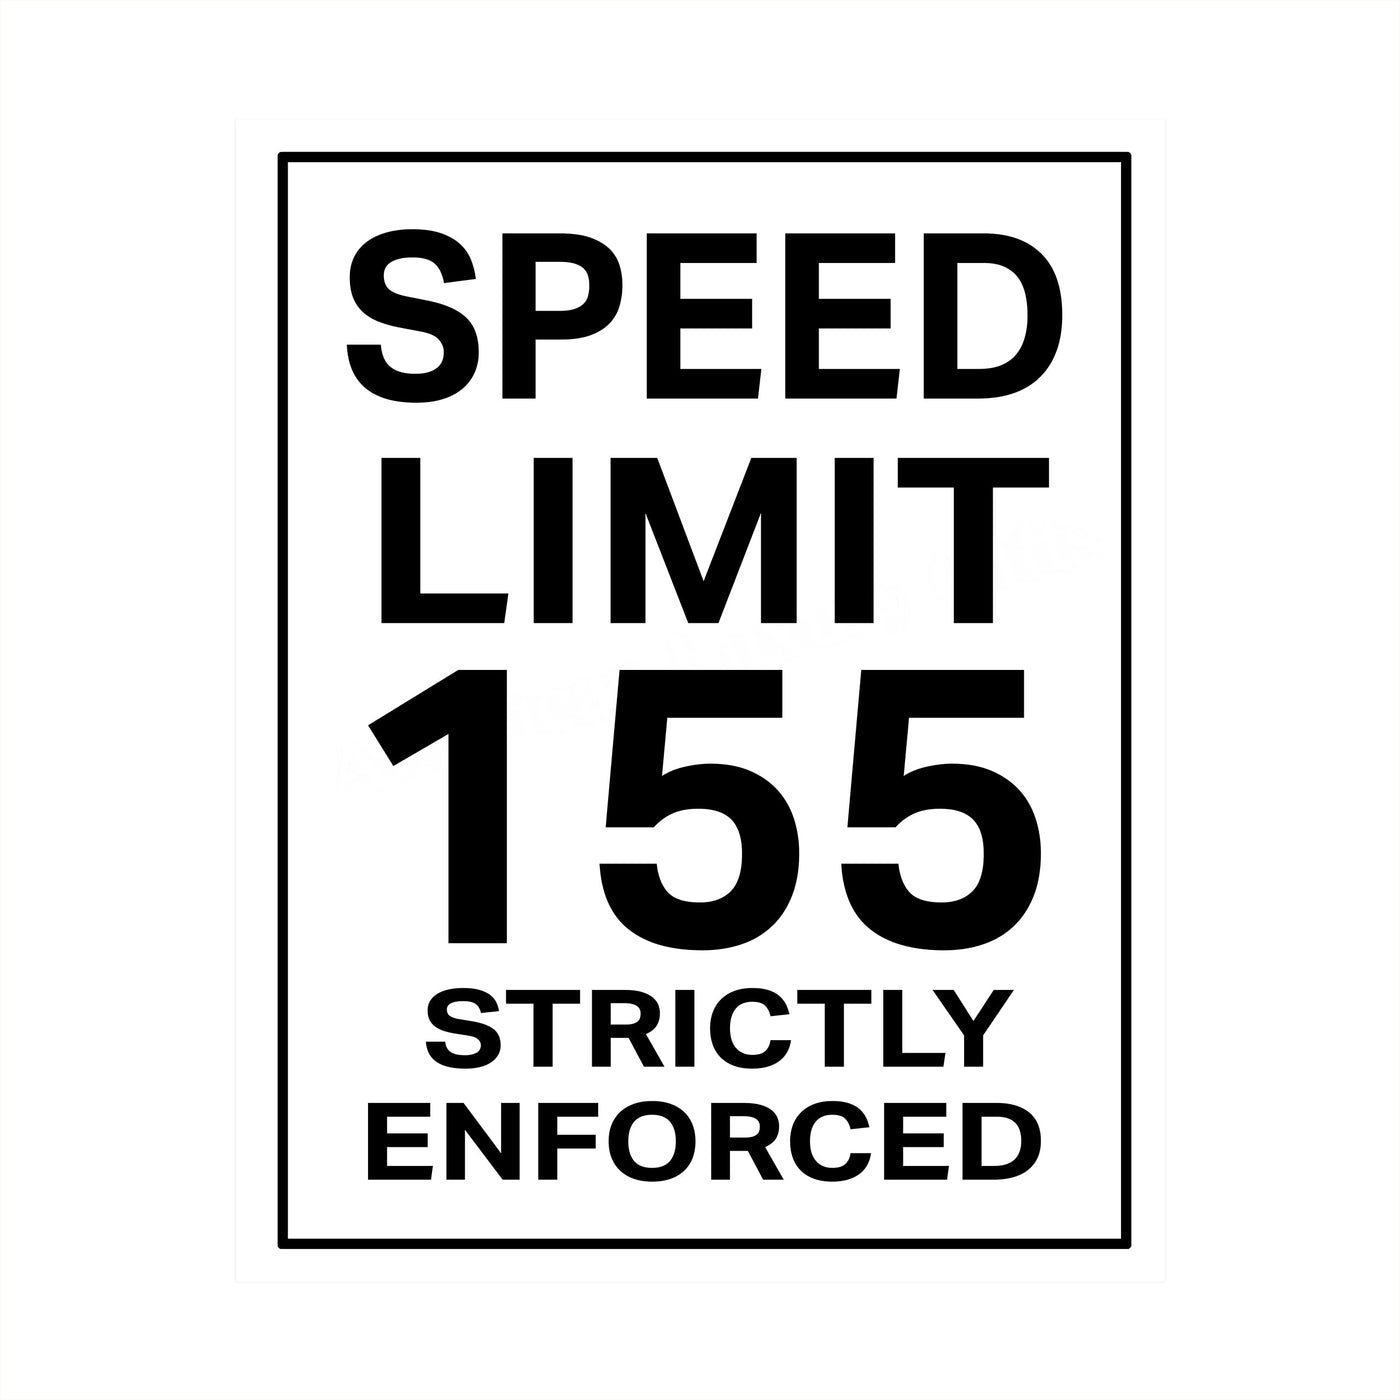 Speed Limit 155-Strictly Enforced-Funny Speed Limit Wall Sign -8x10"-Replica Metal Sign Wall Print-Ready to Frame. Home-Office-Racing Decor. Perfect for Man Cave-Bar-Garage! Printed on Photo Paper.